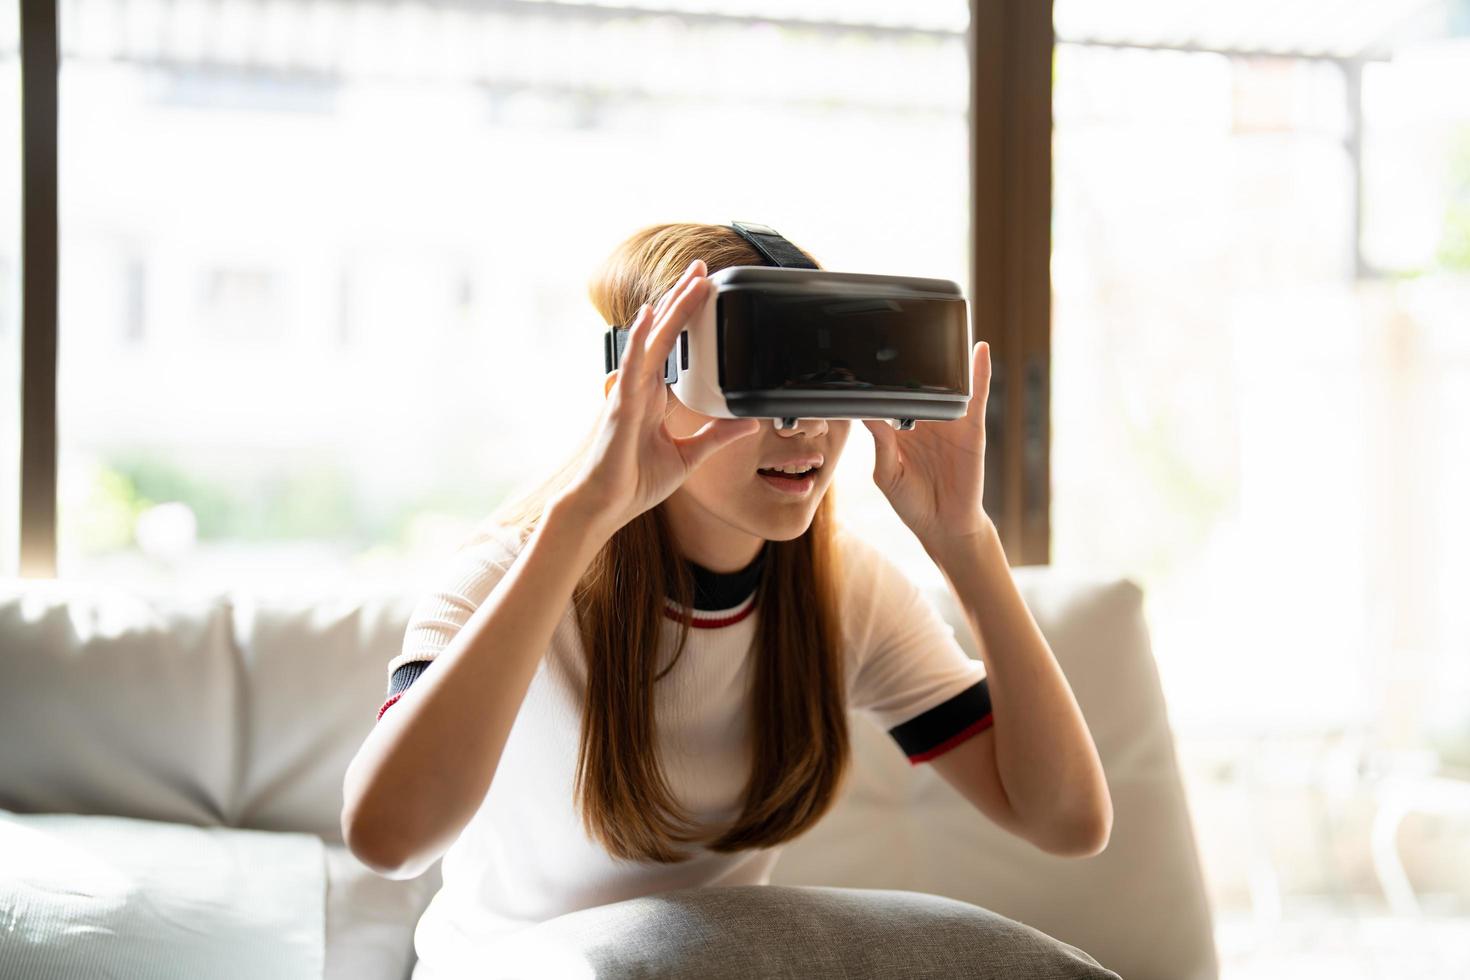 Excite asian woman playing online game with vr glasses and controller at her home photo